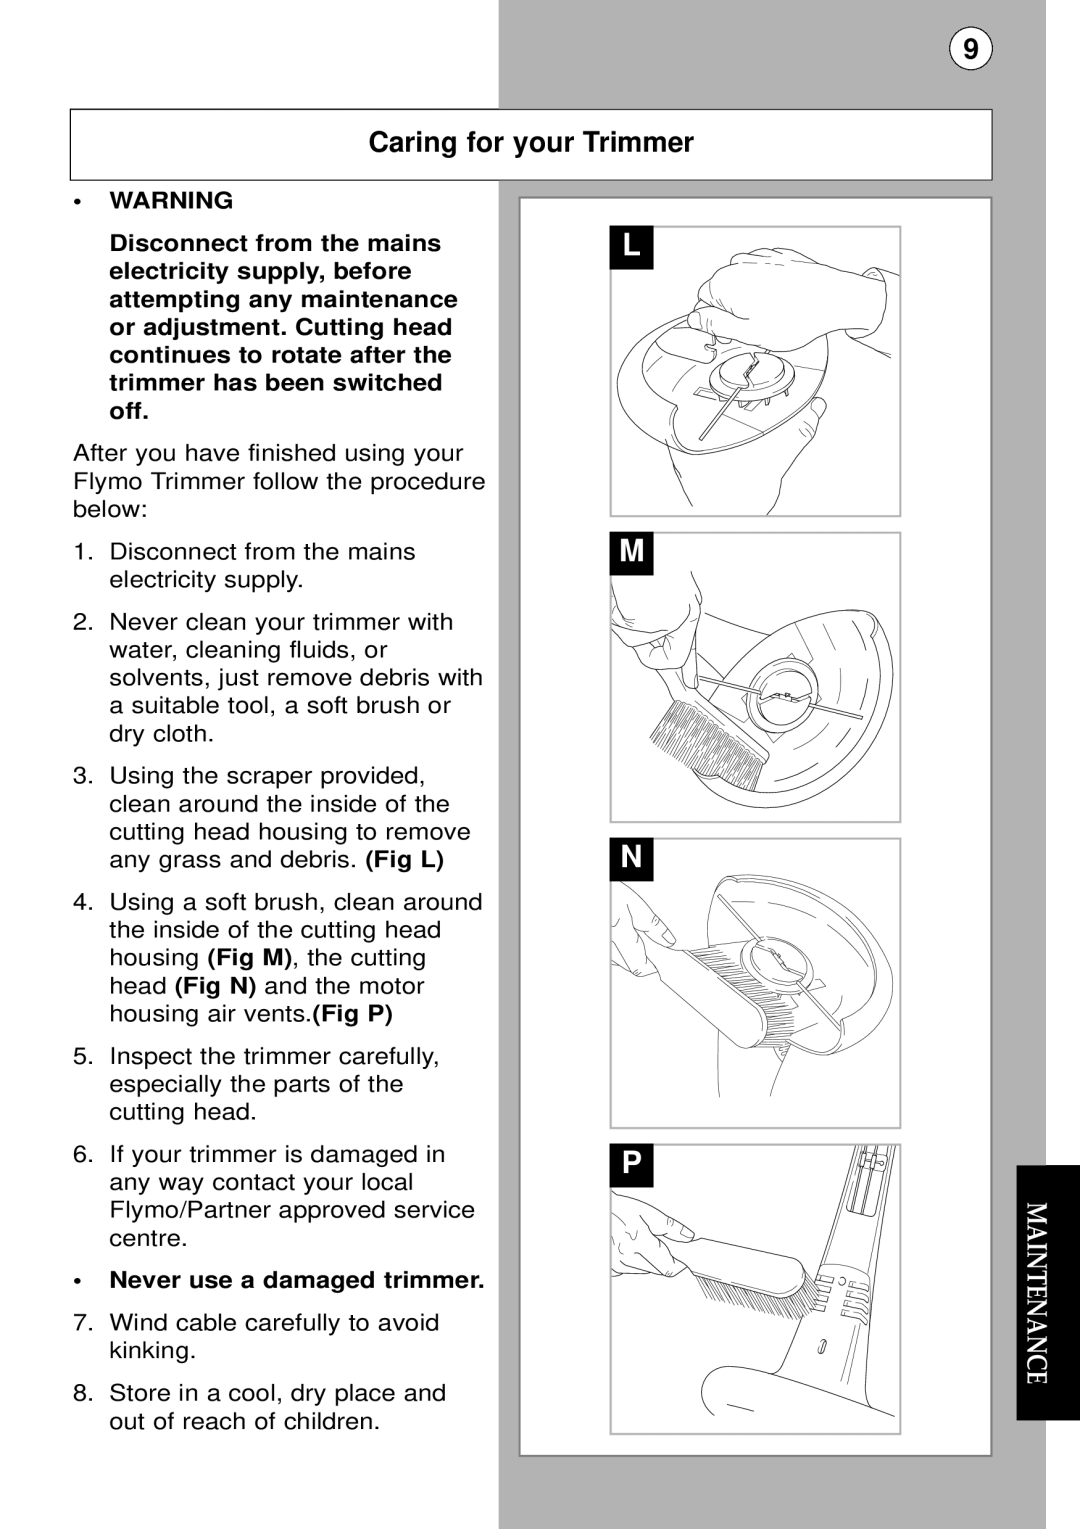 Flymo Trimmer I instruction manual Caring for your Trimmer, Never use a damaged trimmer, Maintenance 